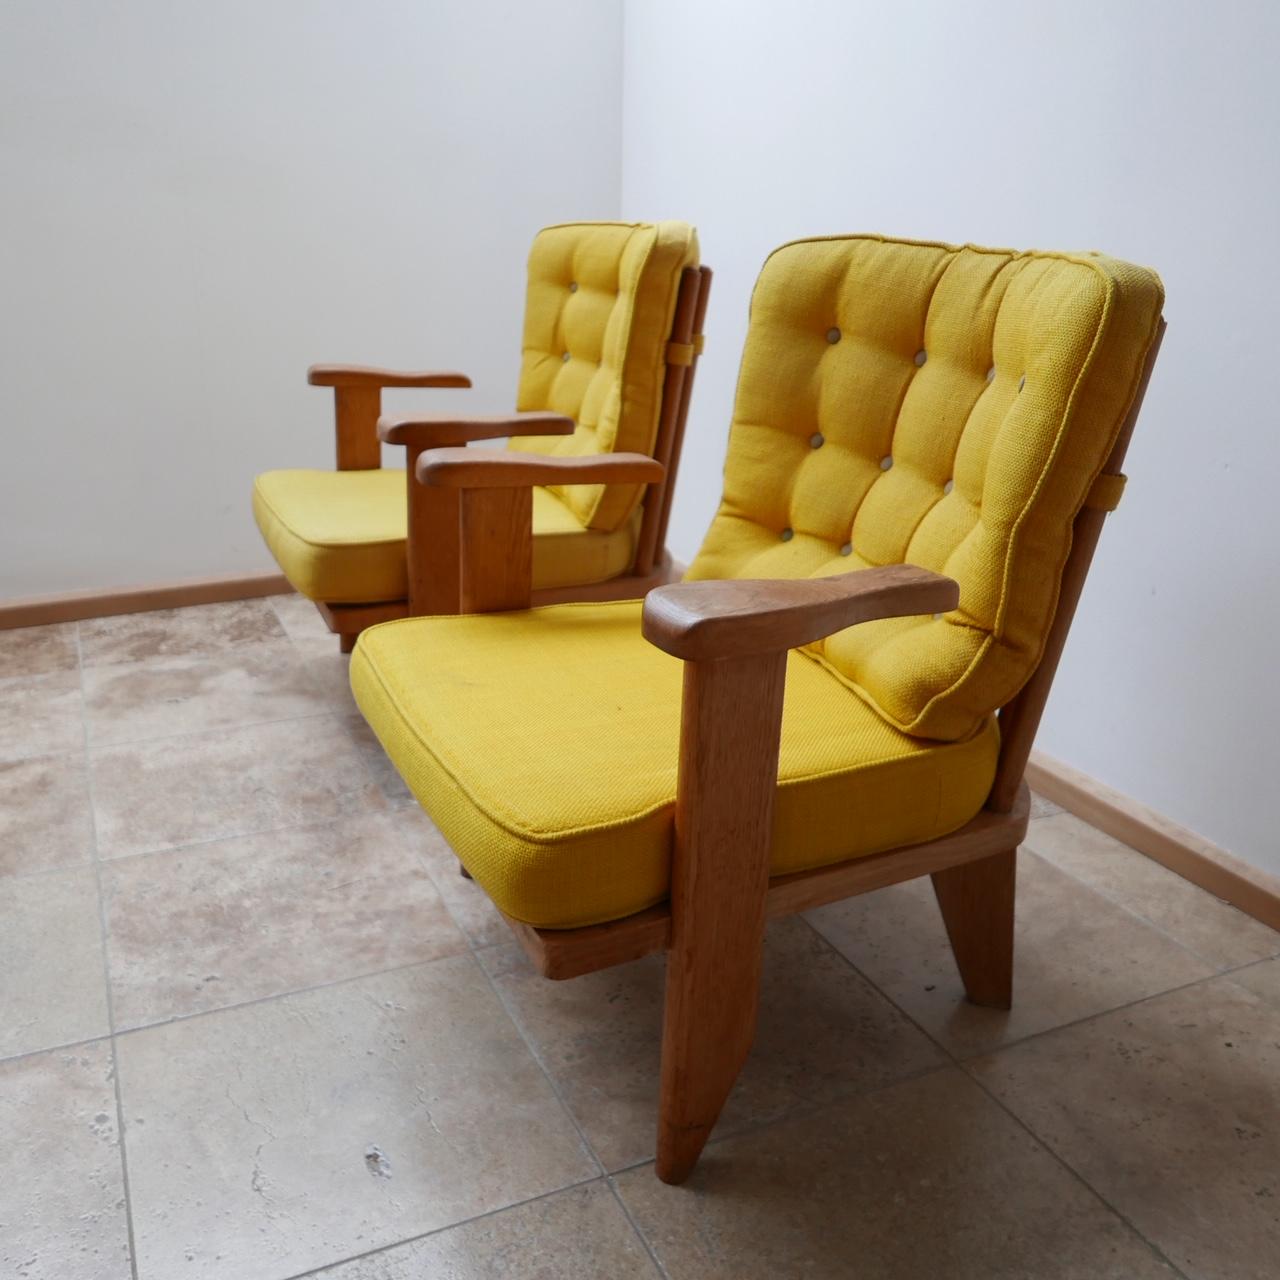 A pair of armchairs by French designers Guillerme et Chambron. 

French, circa 1960s. 

Solid oak, original upholstery that is usable but wants updating which we can arrange if needed. 

Retractable cupholders which are a useful but unusual